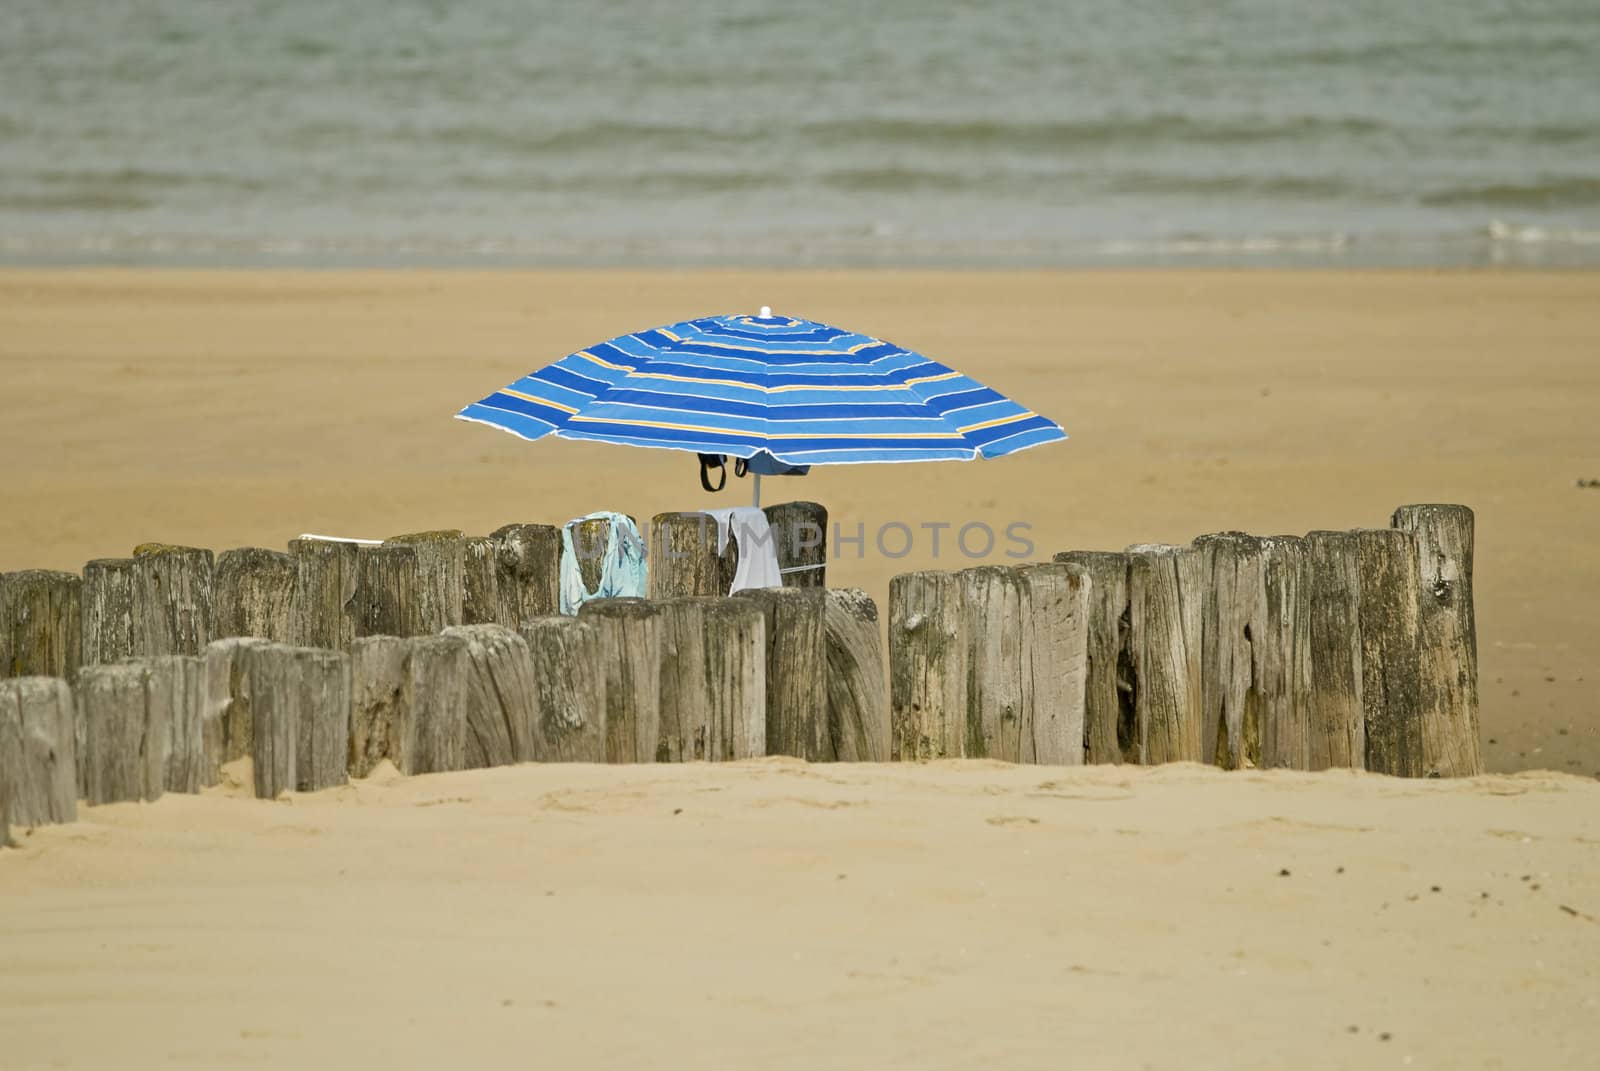 Umbrella on a beach by Gertje